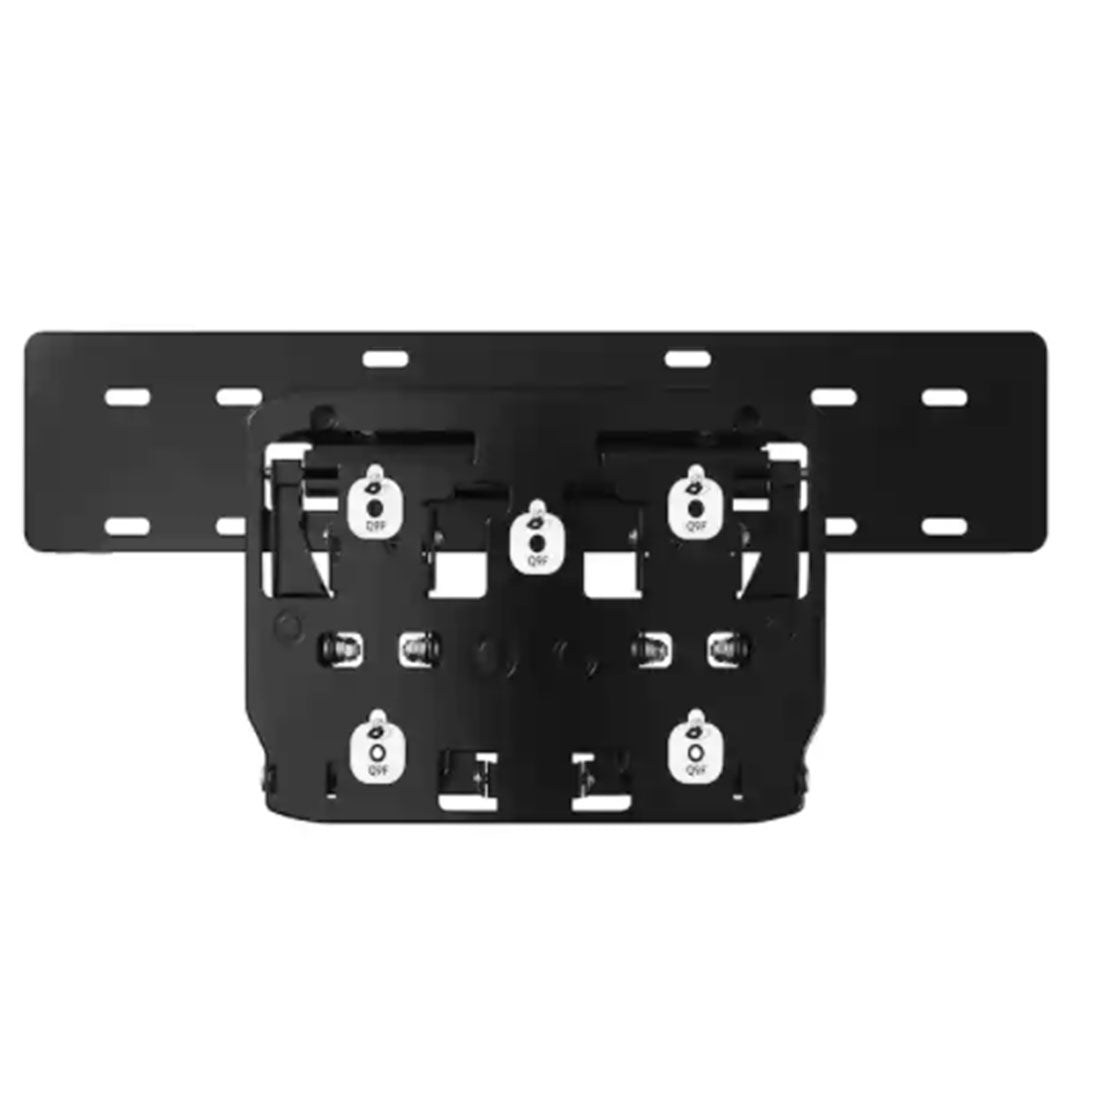 Samsung WMN-M21EB/ZA No Gap Wall Mount for 75” Q Series TVs - 2021 Model - Clearance